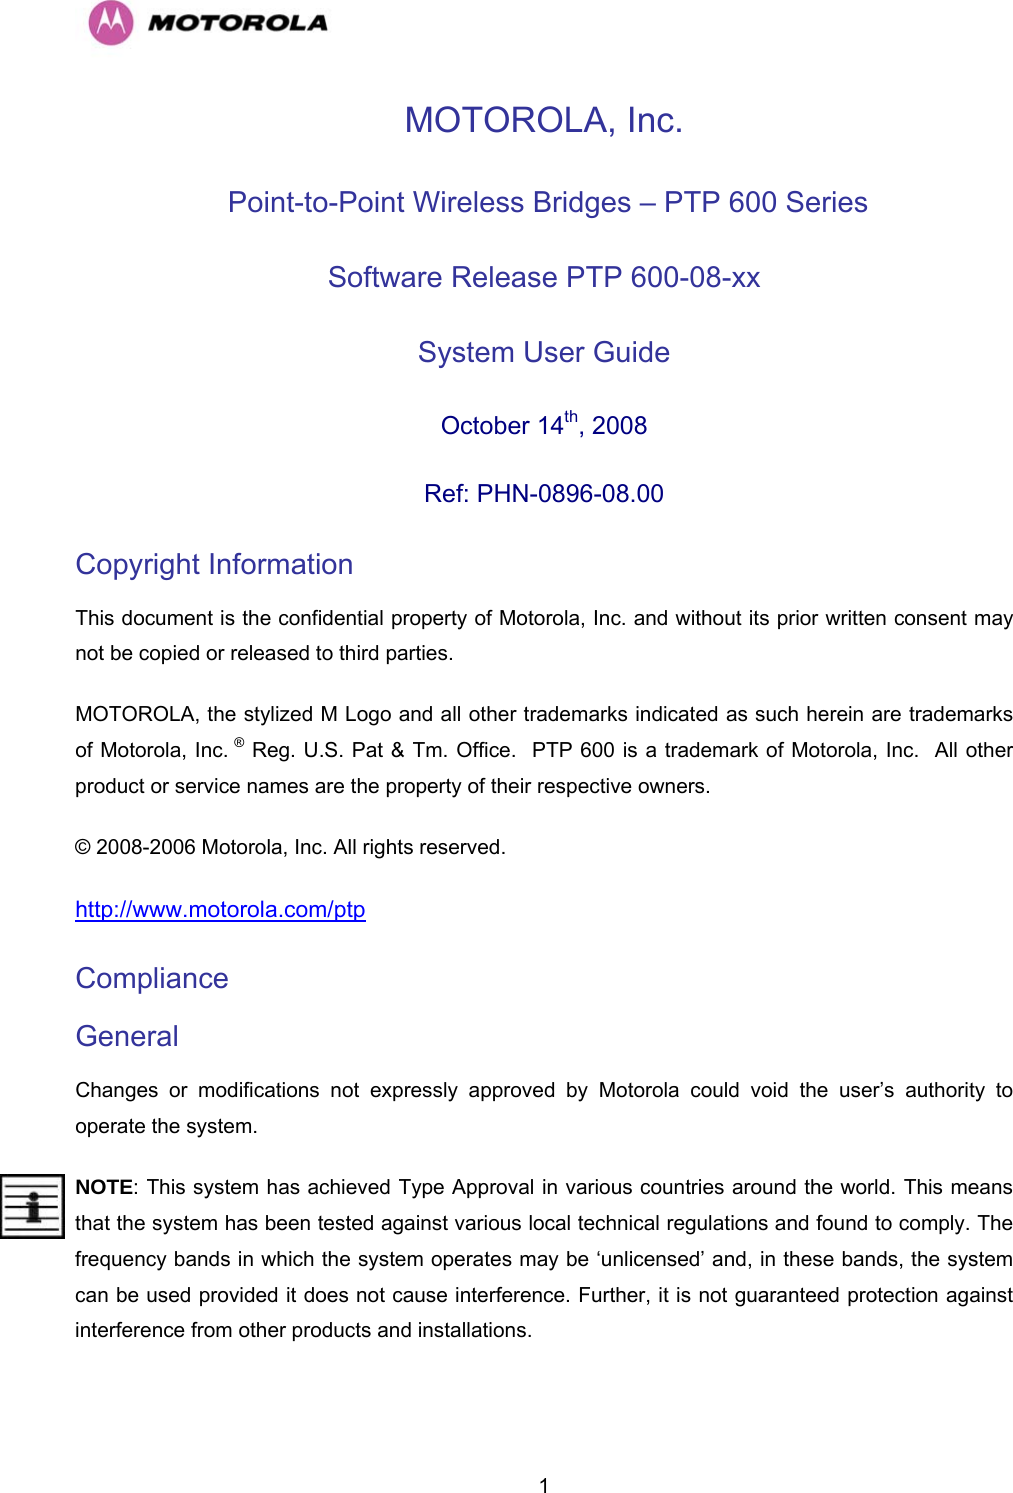   1MOTOROLA, Inc.  Point-to-Point Wireless Bridges – PTP 600 Series Software Release PTP 600-08-xx System User Guide  October 14th, 2008 Ref: PHN-0896-08.00 Copyright Information This document is the confidential property of Motorola, Inc. and without its prior written consent may not be copied or released to third parties.  MOTOROLA, the stylized M Logo and all other trademarks indicated as such herein are trademarks of Motorola, Inc. ® Reg. U.S. Pat &amp; Tm. Office.  PTP 600 is a trademark of Motorola, Inc.  All other product or service names are the property of their respective owners. © 2008-2006 Motorola, Inc. All rights reserved. http://www.motorola.com/ptp Compliance  General Changes or modifications not expressly approved by Motorola could void the user’s authority to operate the system.  NOTE: This system has achieved Type Approval in various countries around the world. This means that the system has been tested against various local technical regulations and found to comply. The frequency bands in which the system operates may be ‘unlicensed’ and, in these bands, the system can be used provided it does not cause interference. Further, it is not guaranteed protection against interference from other products and installations. 